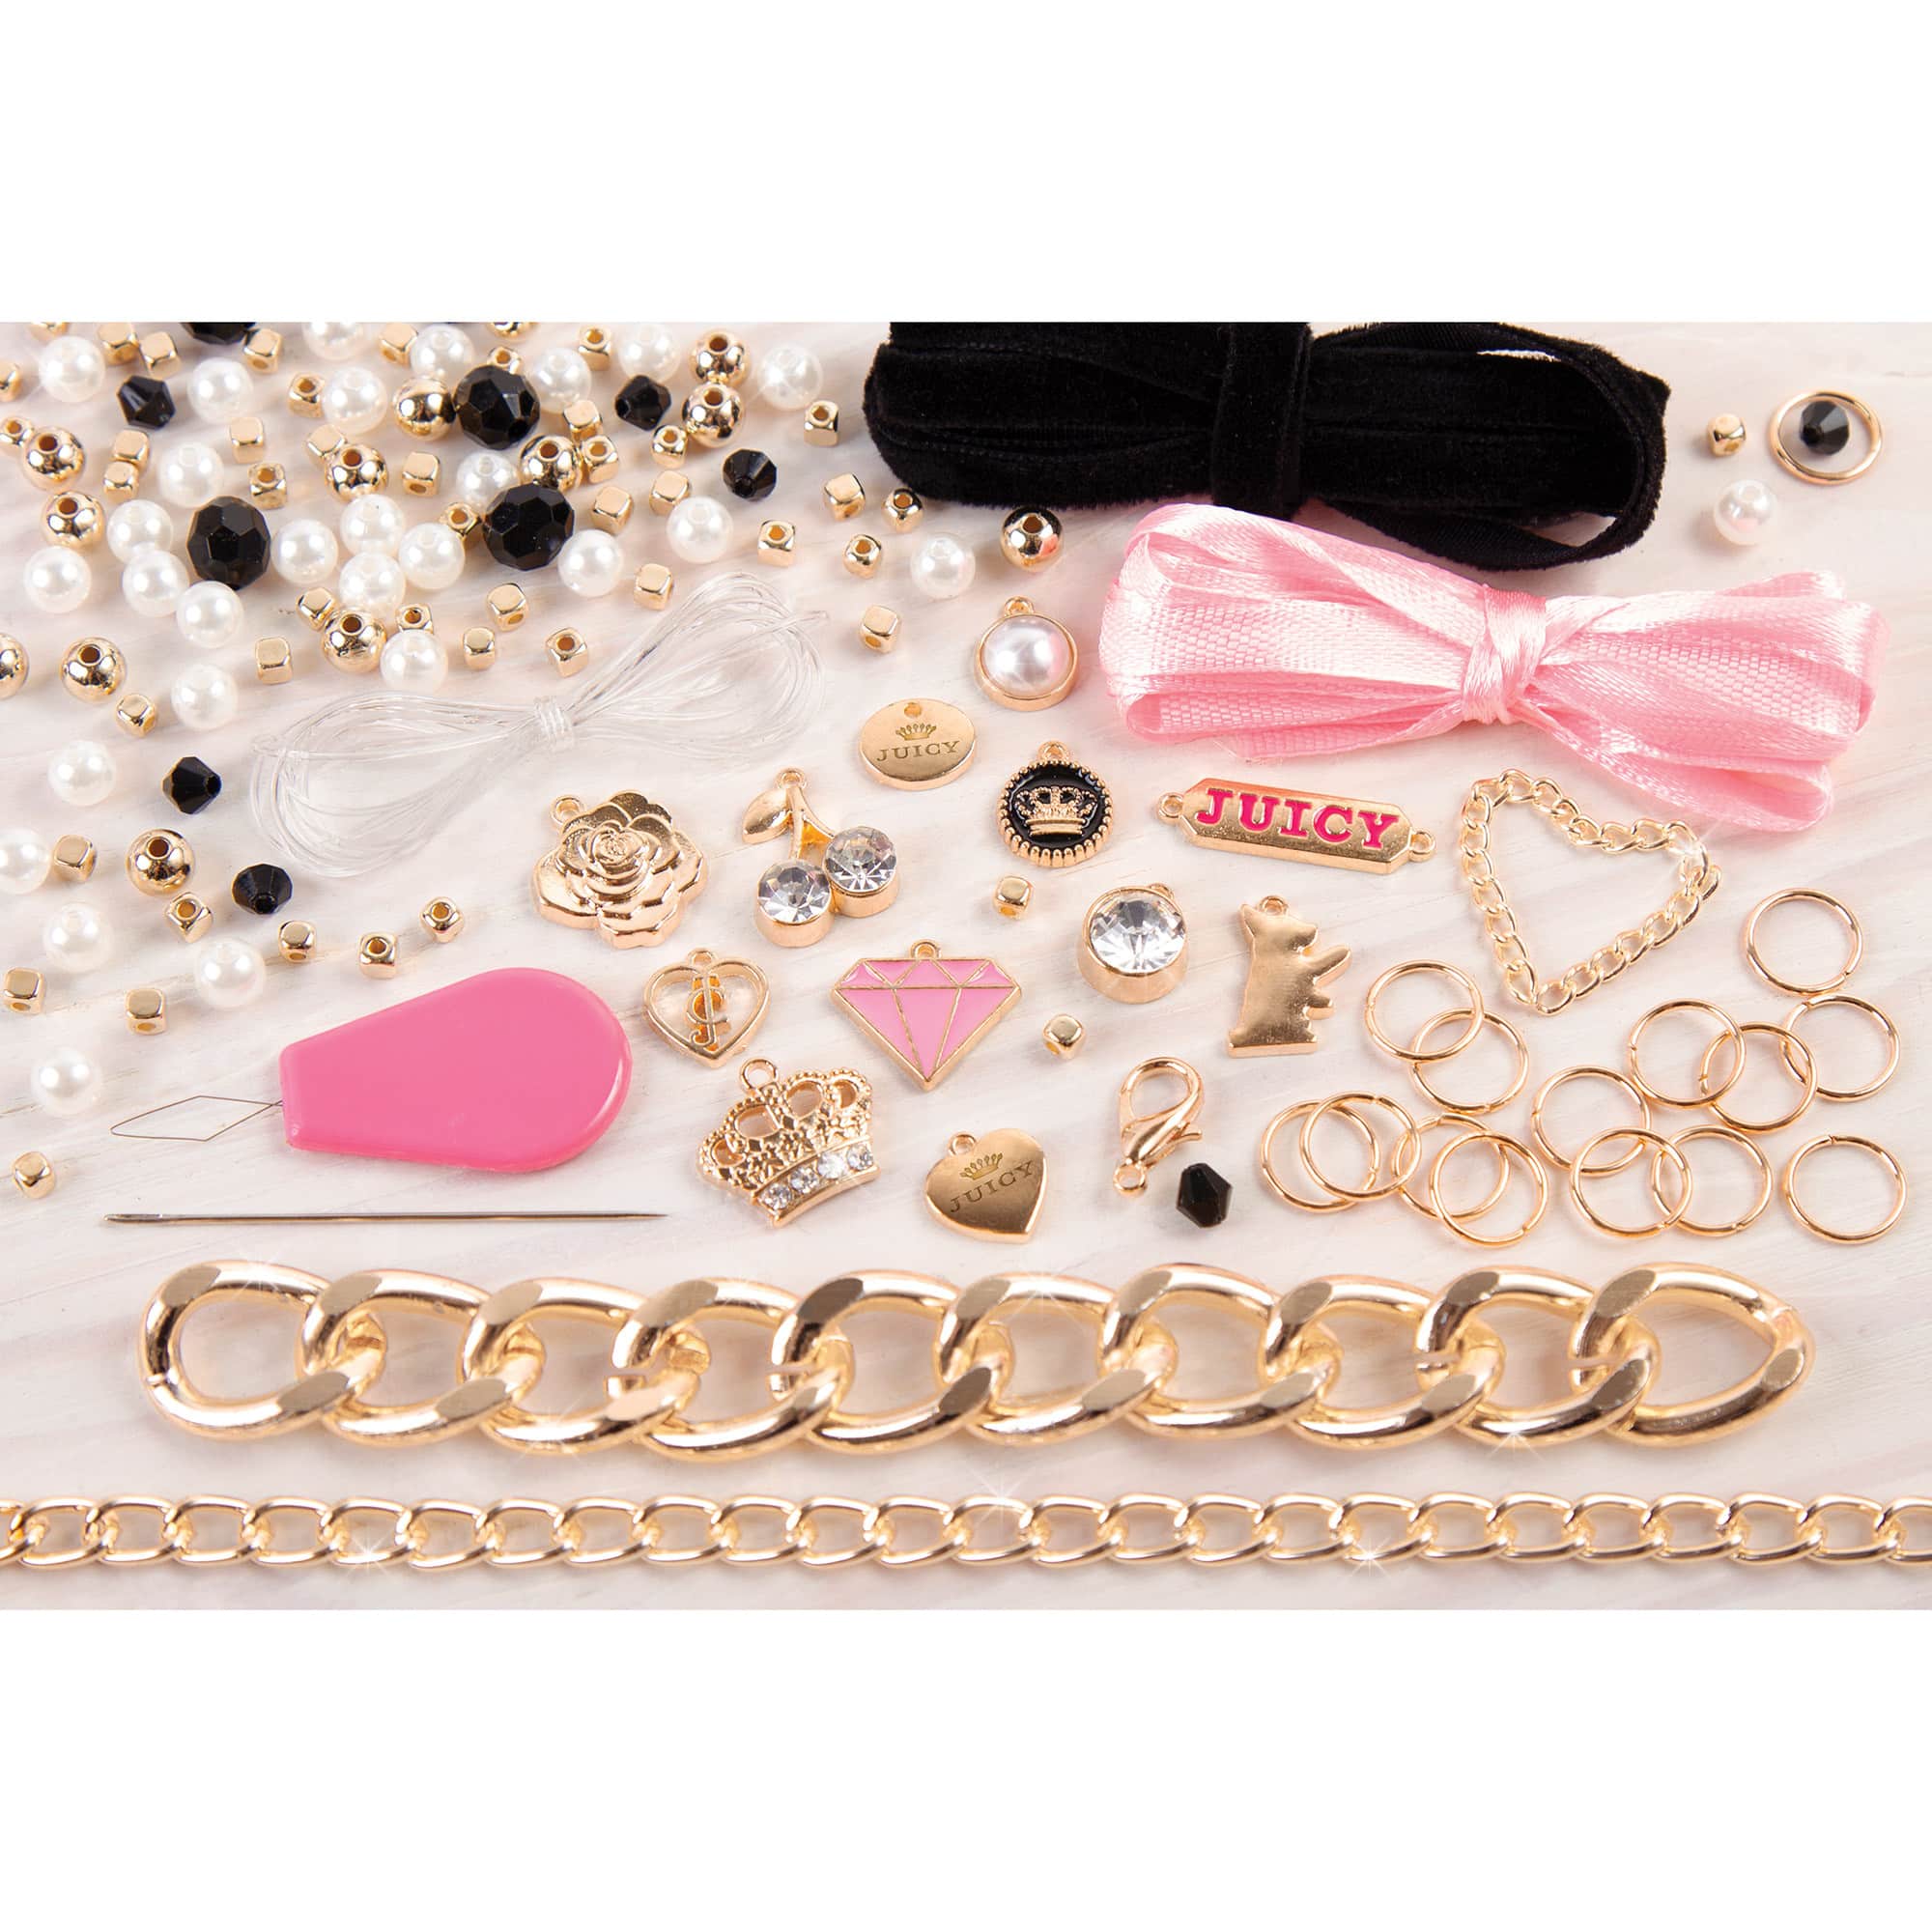 Make It Real - Juicy Couture - Chains & Charms